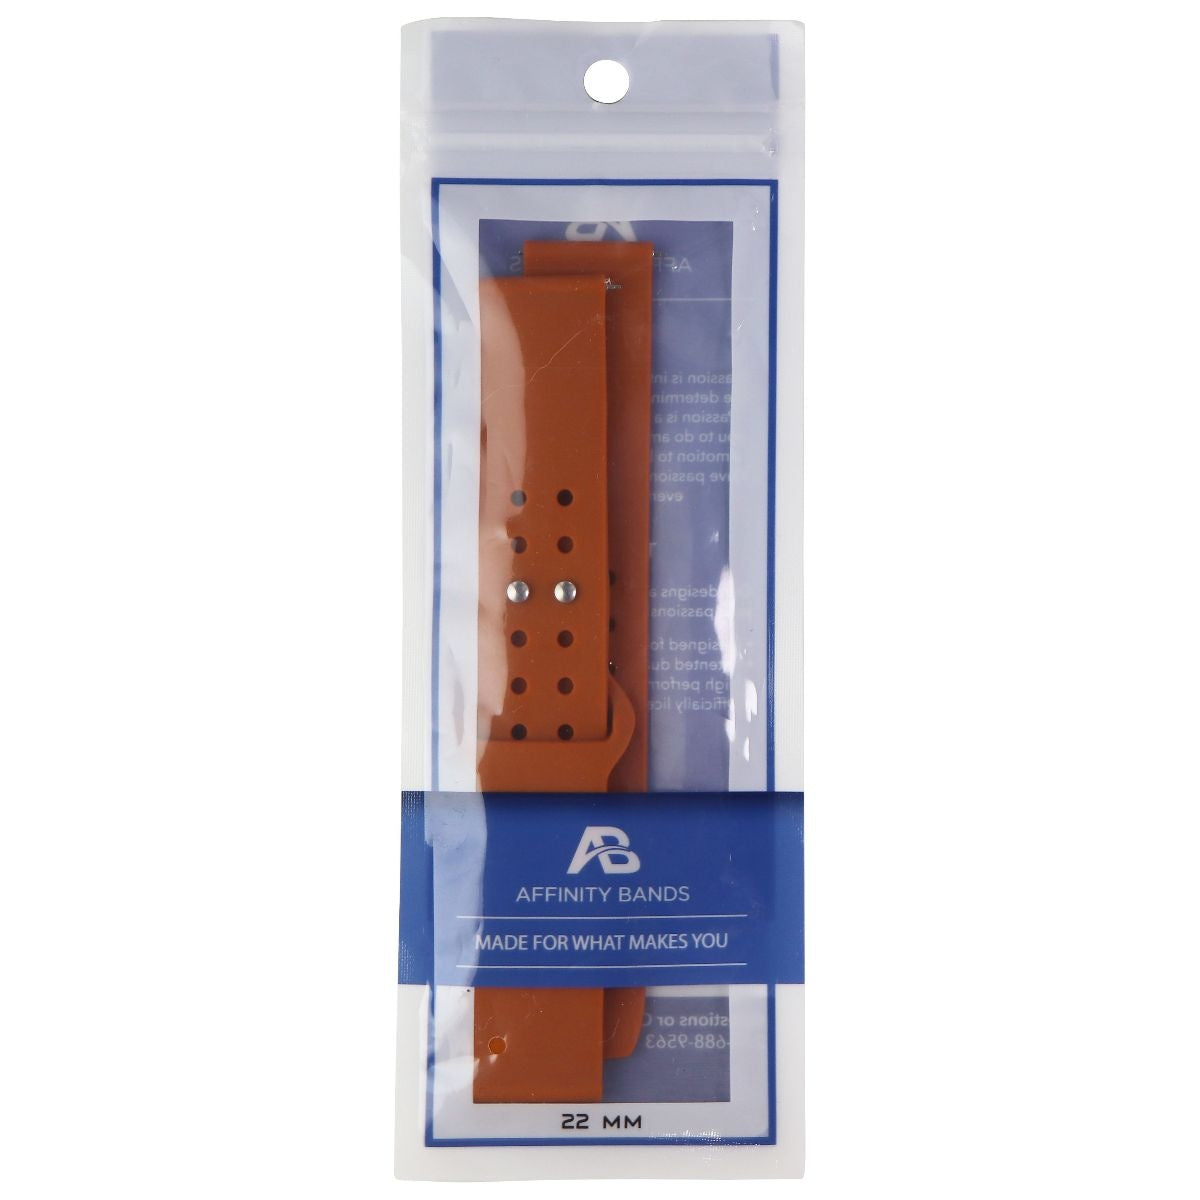 Affinity 22mm Silicone Band for Smartwatches, Watches & More - Burnt Orange Smart Watch Accessories - Watch Bands Affinity Bands    - Simple Cell Bulk Wholesale Pricing - USA Seller